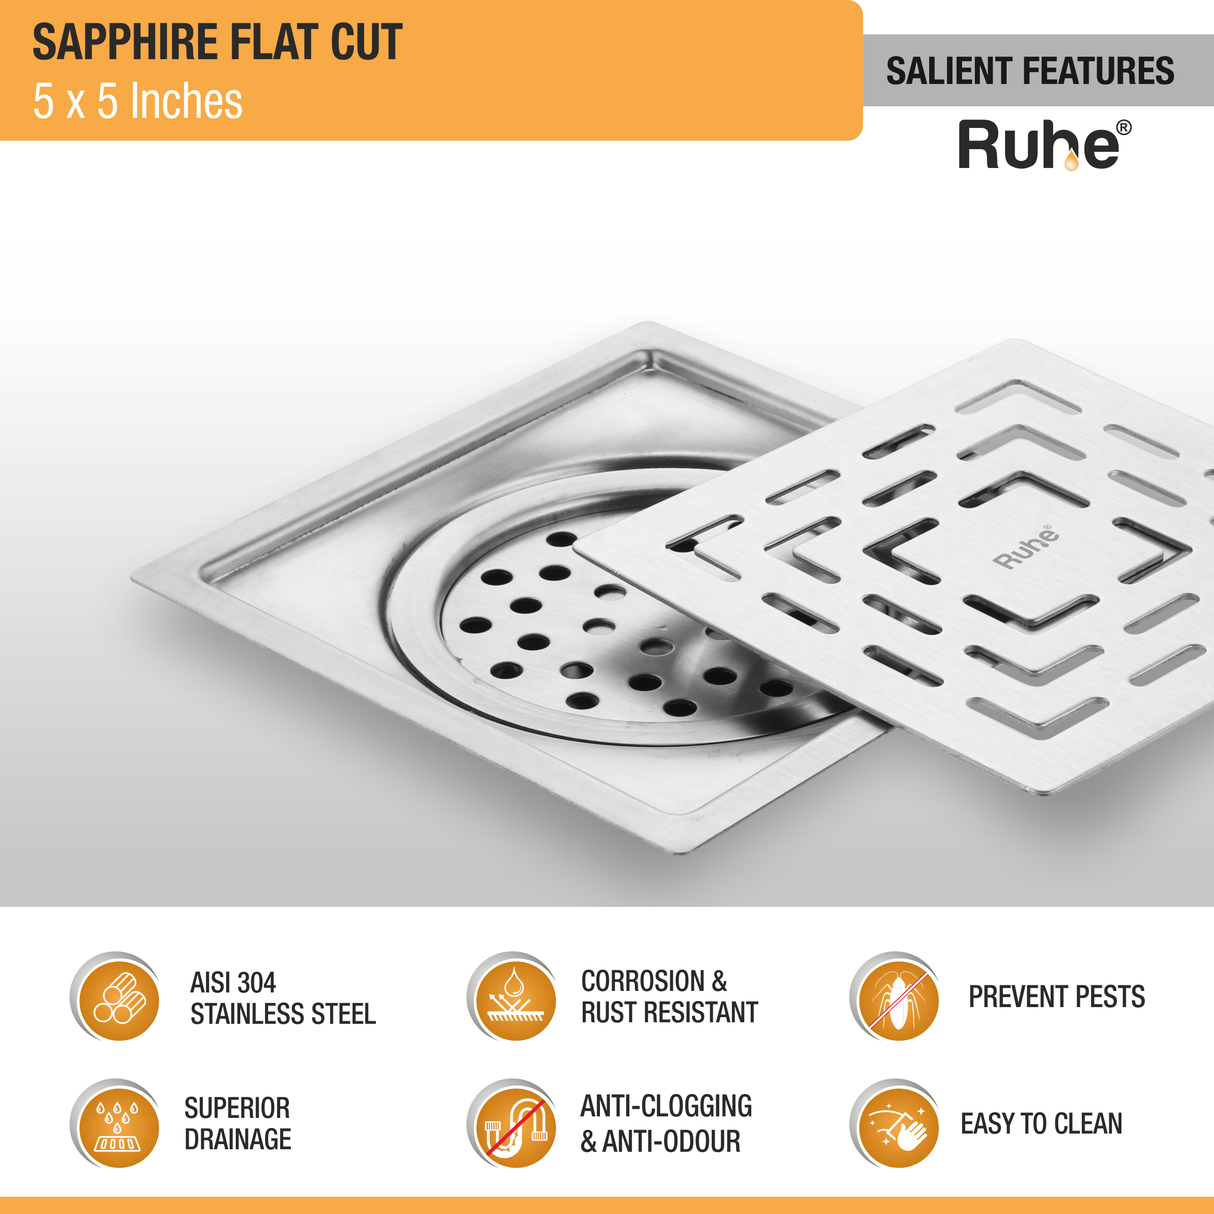 Sapphire Floor Drain Square Flat Cut (5 x 5 Inches) with Cockroach Trap (304 Grade) features